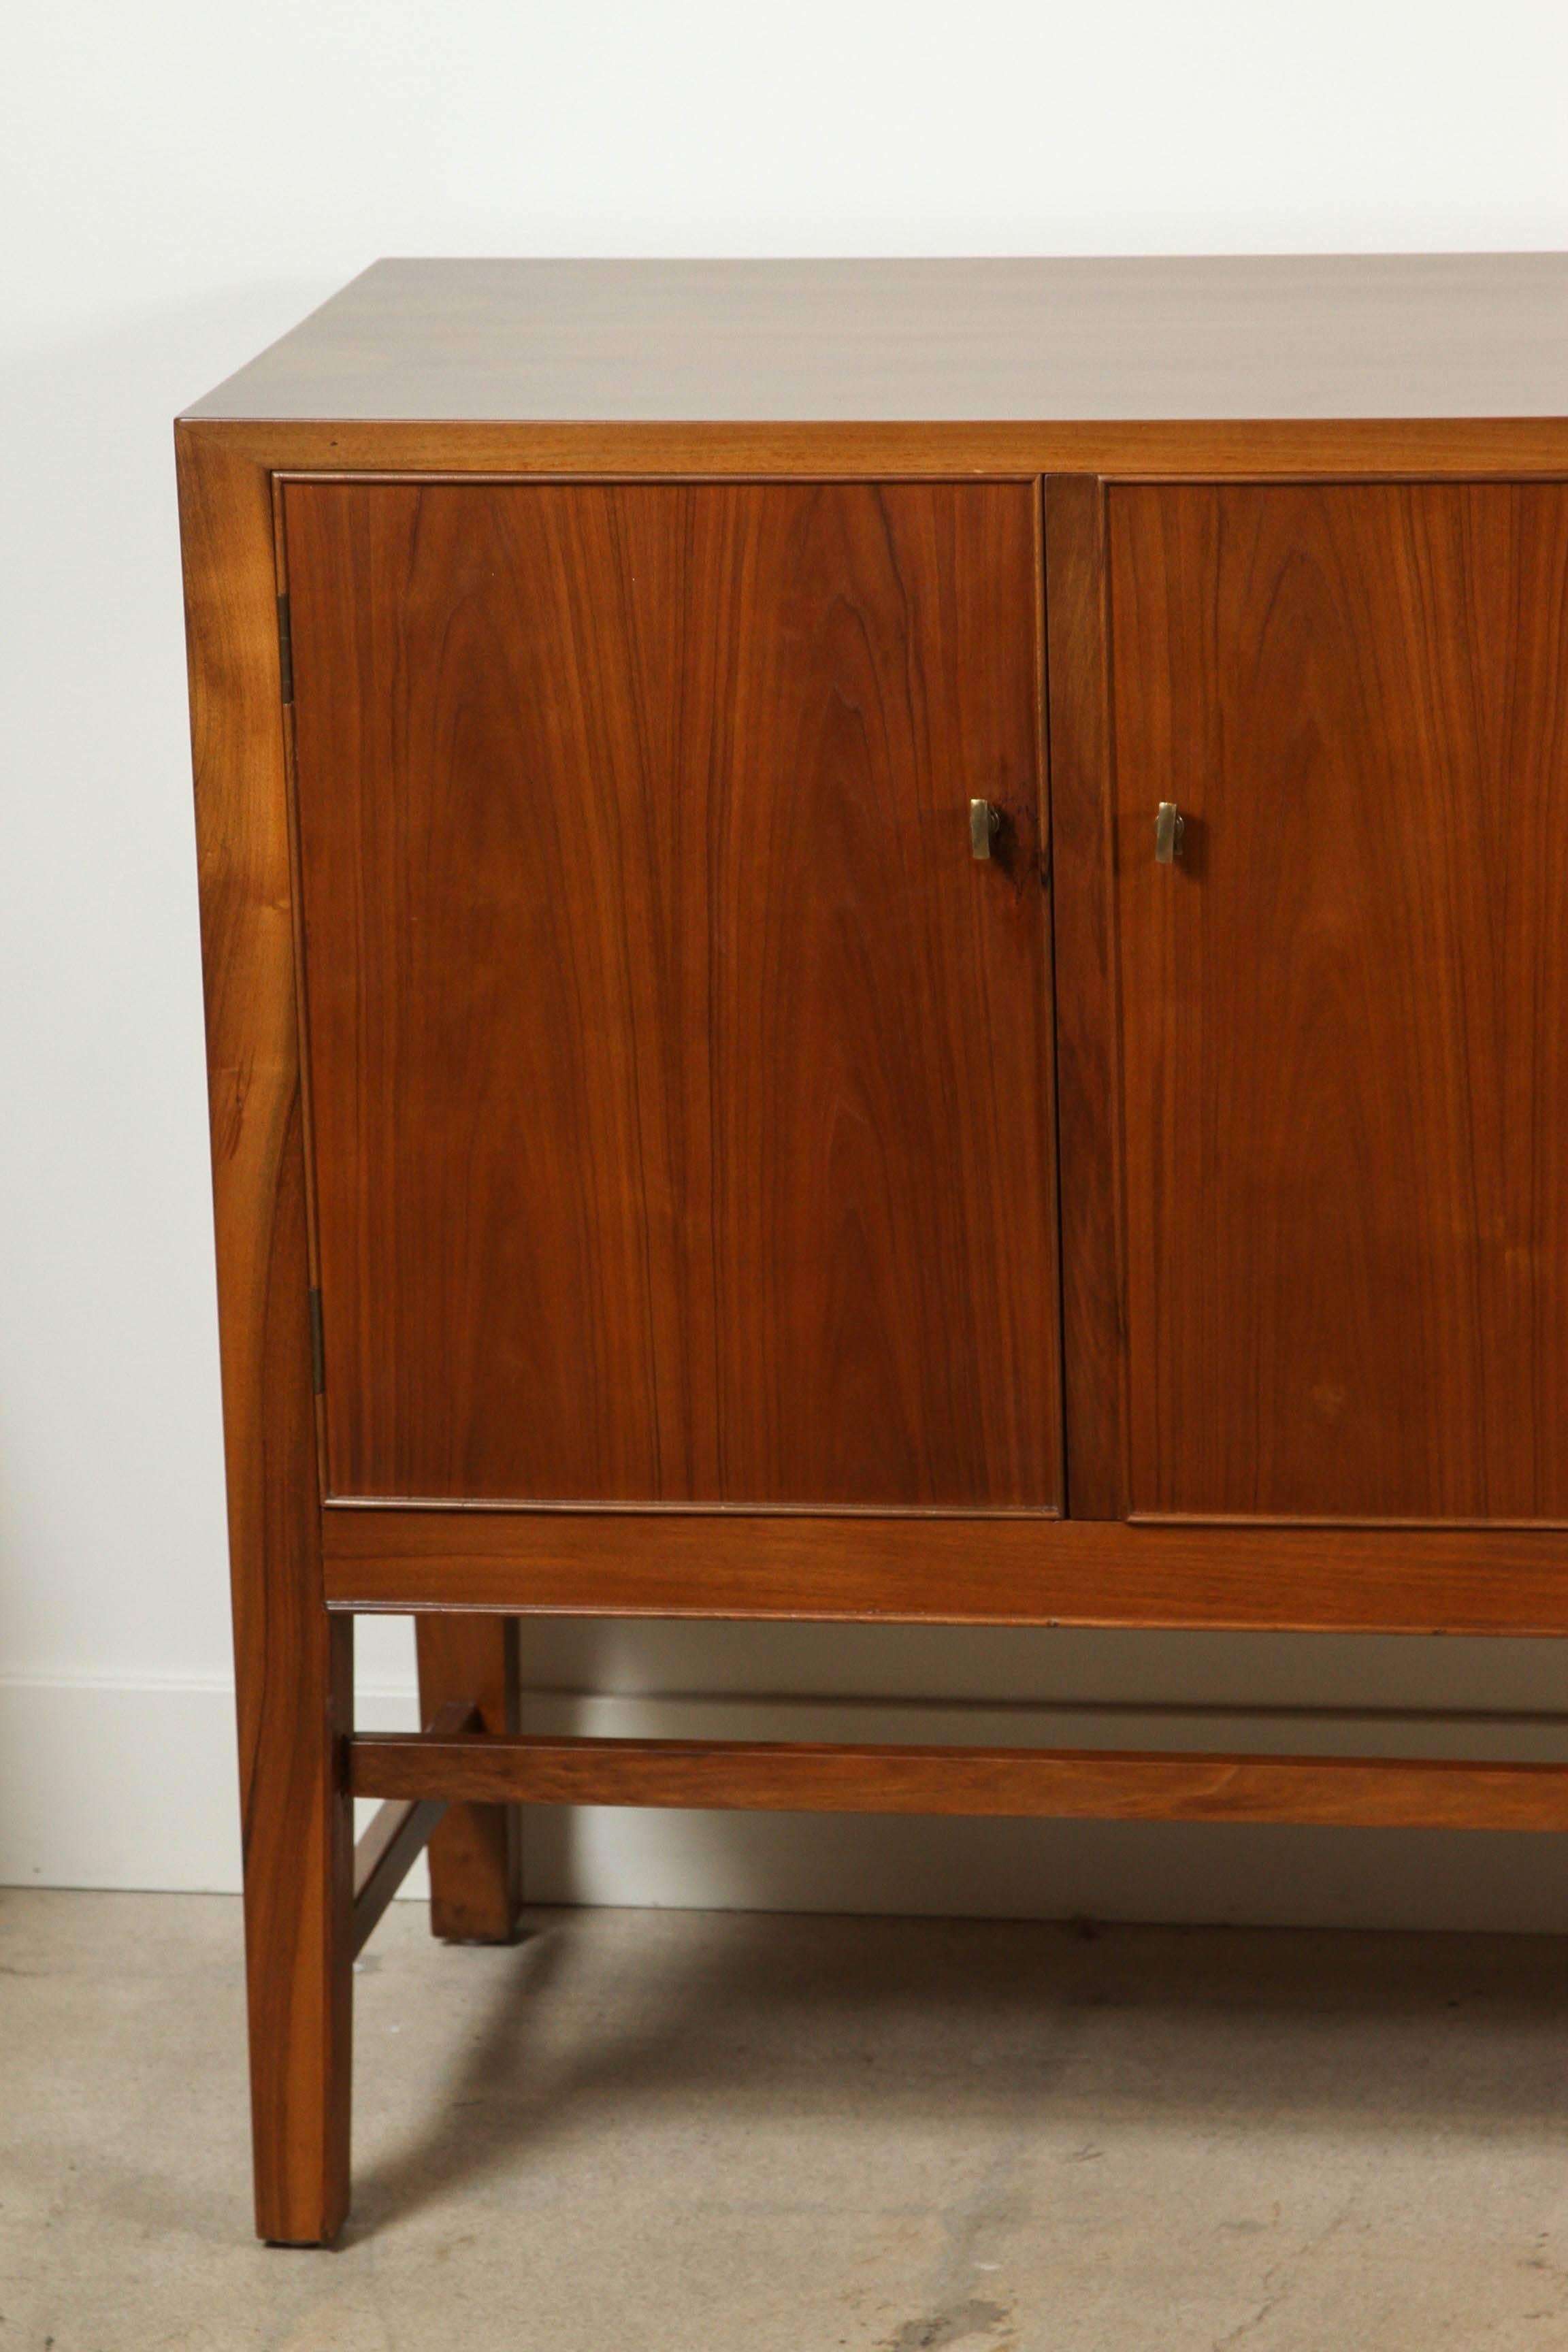 Rosewood sideboard by I. M. Christensen.